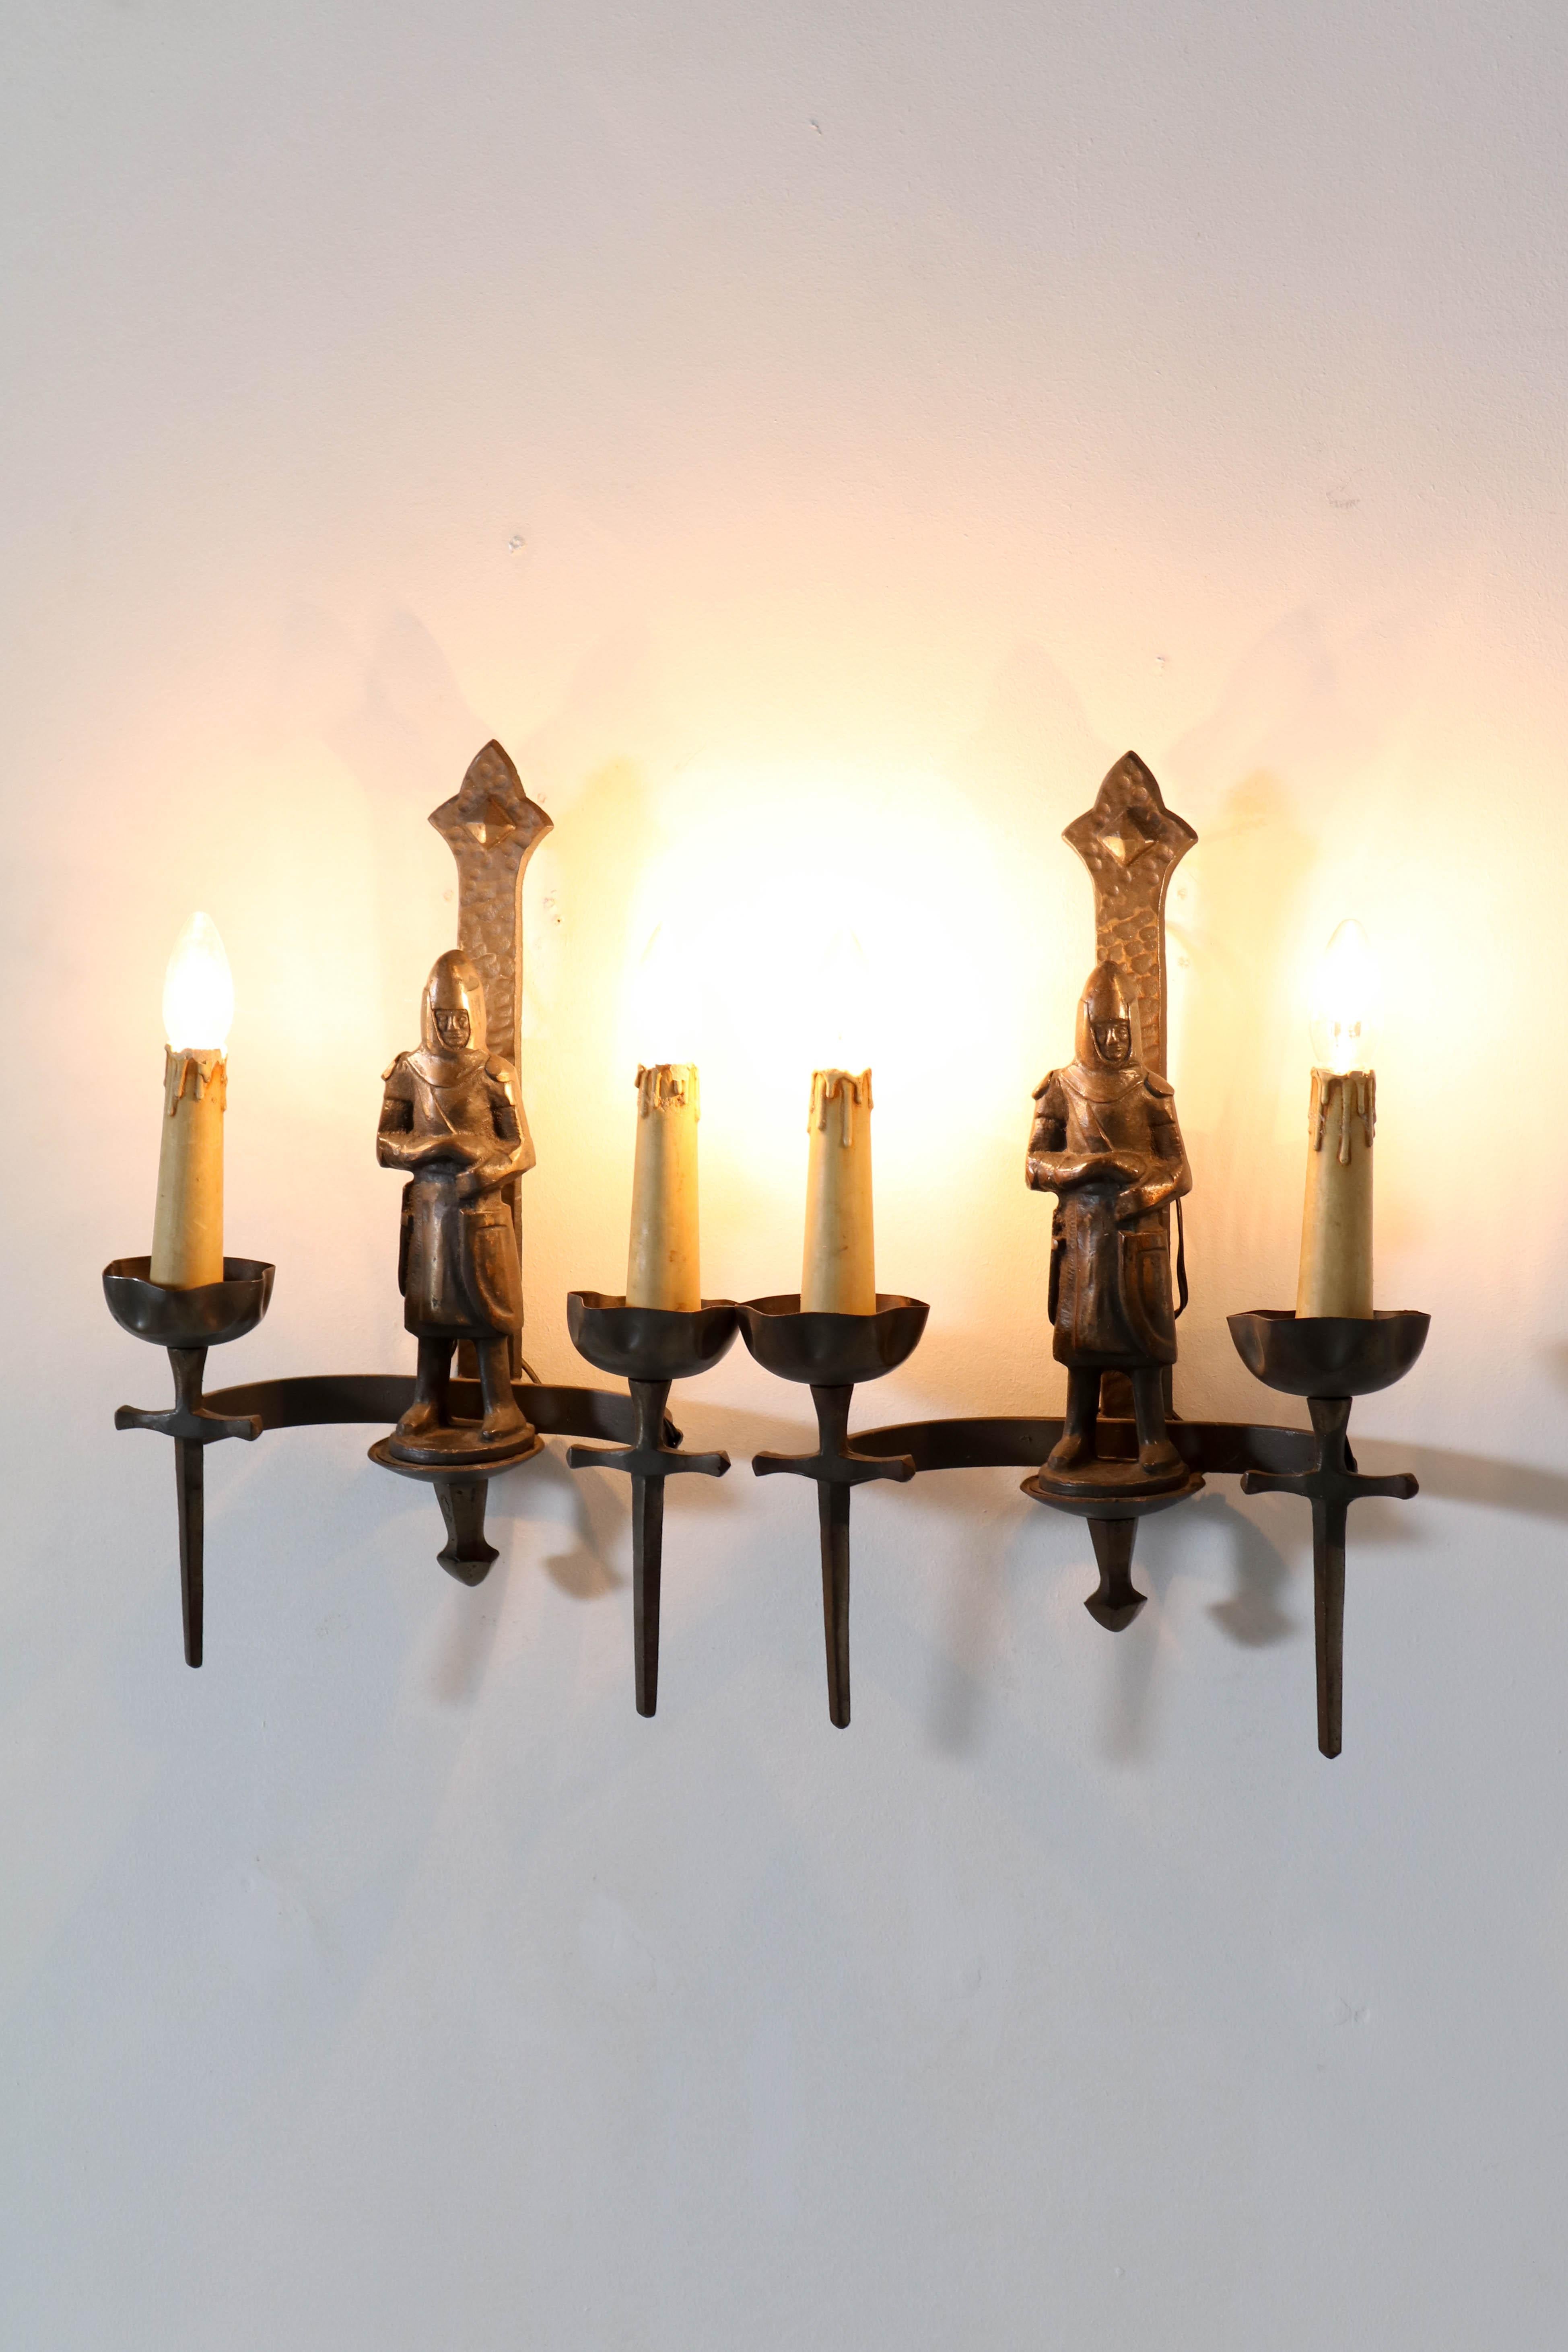 Wonderful and decorative pair of Gothic Revival wall lights or sconses.
Striking French design from the fifties.
Handcrafted with forged and cast iron elements.
In very good original condition with a beautiful bronze patina.